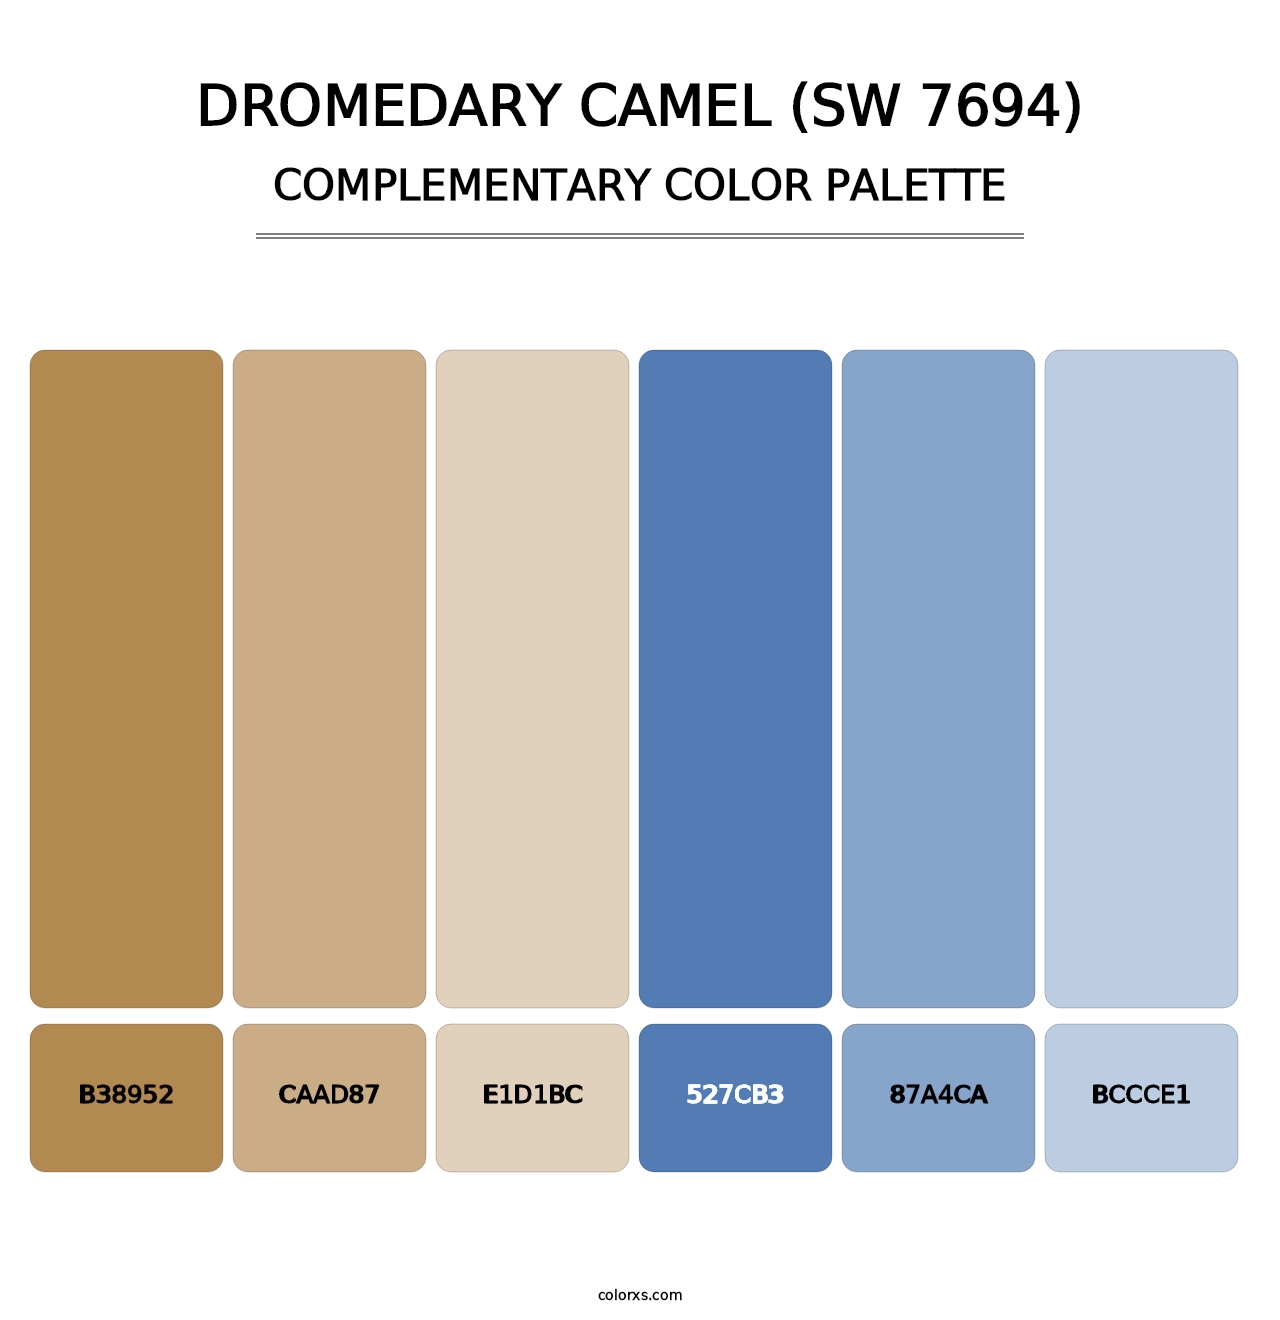 Dromedary Camel (SW 7694) - Complementary Color Palette